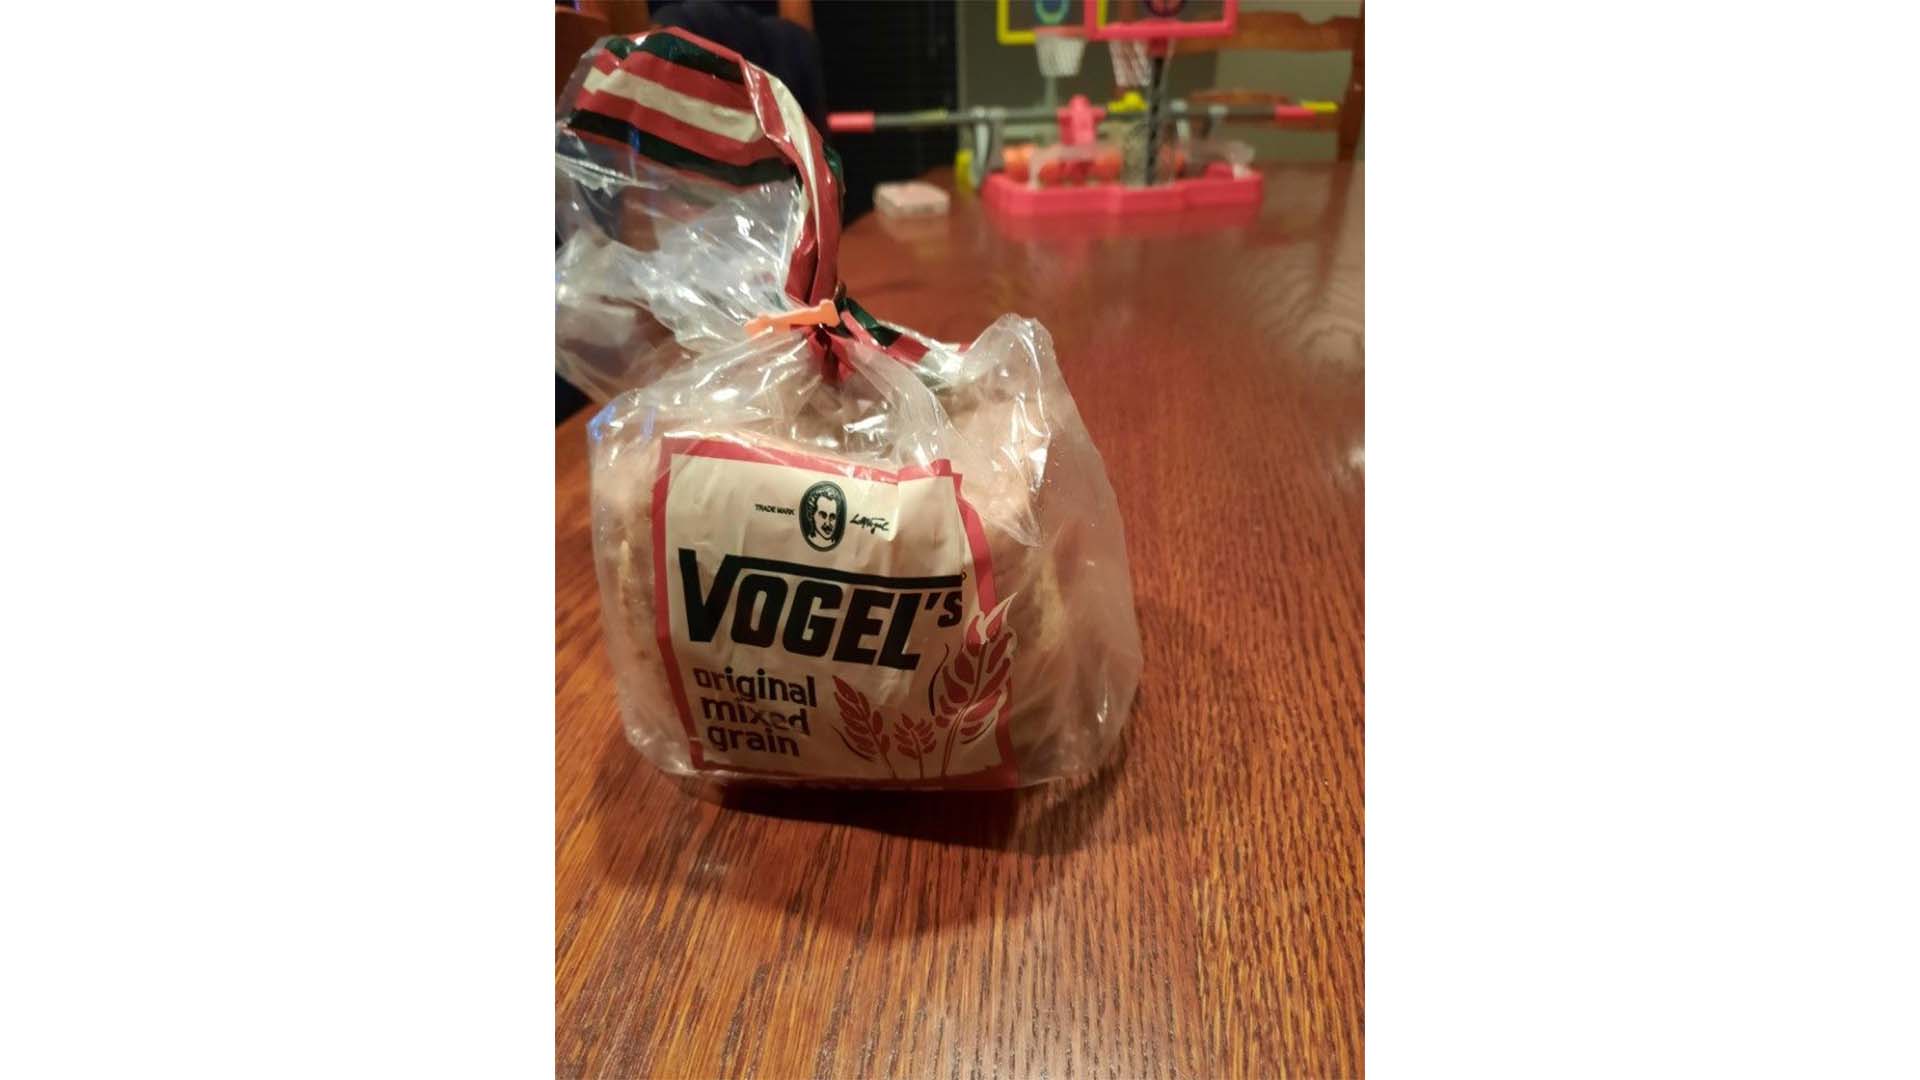 A half-eaten loaf of Vogel’s bread, the surprise star of 2021, sold for $4,000 on Trade Me during lockdown.